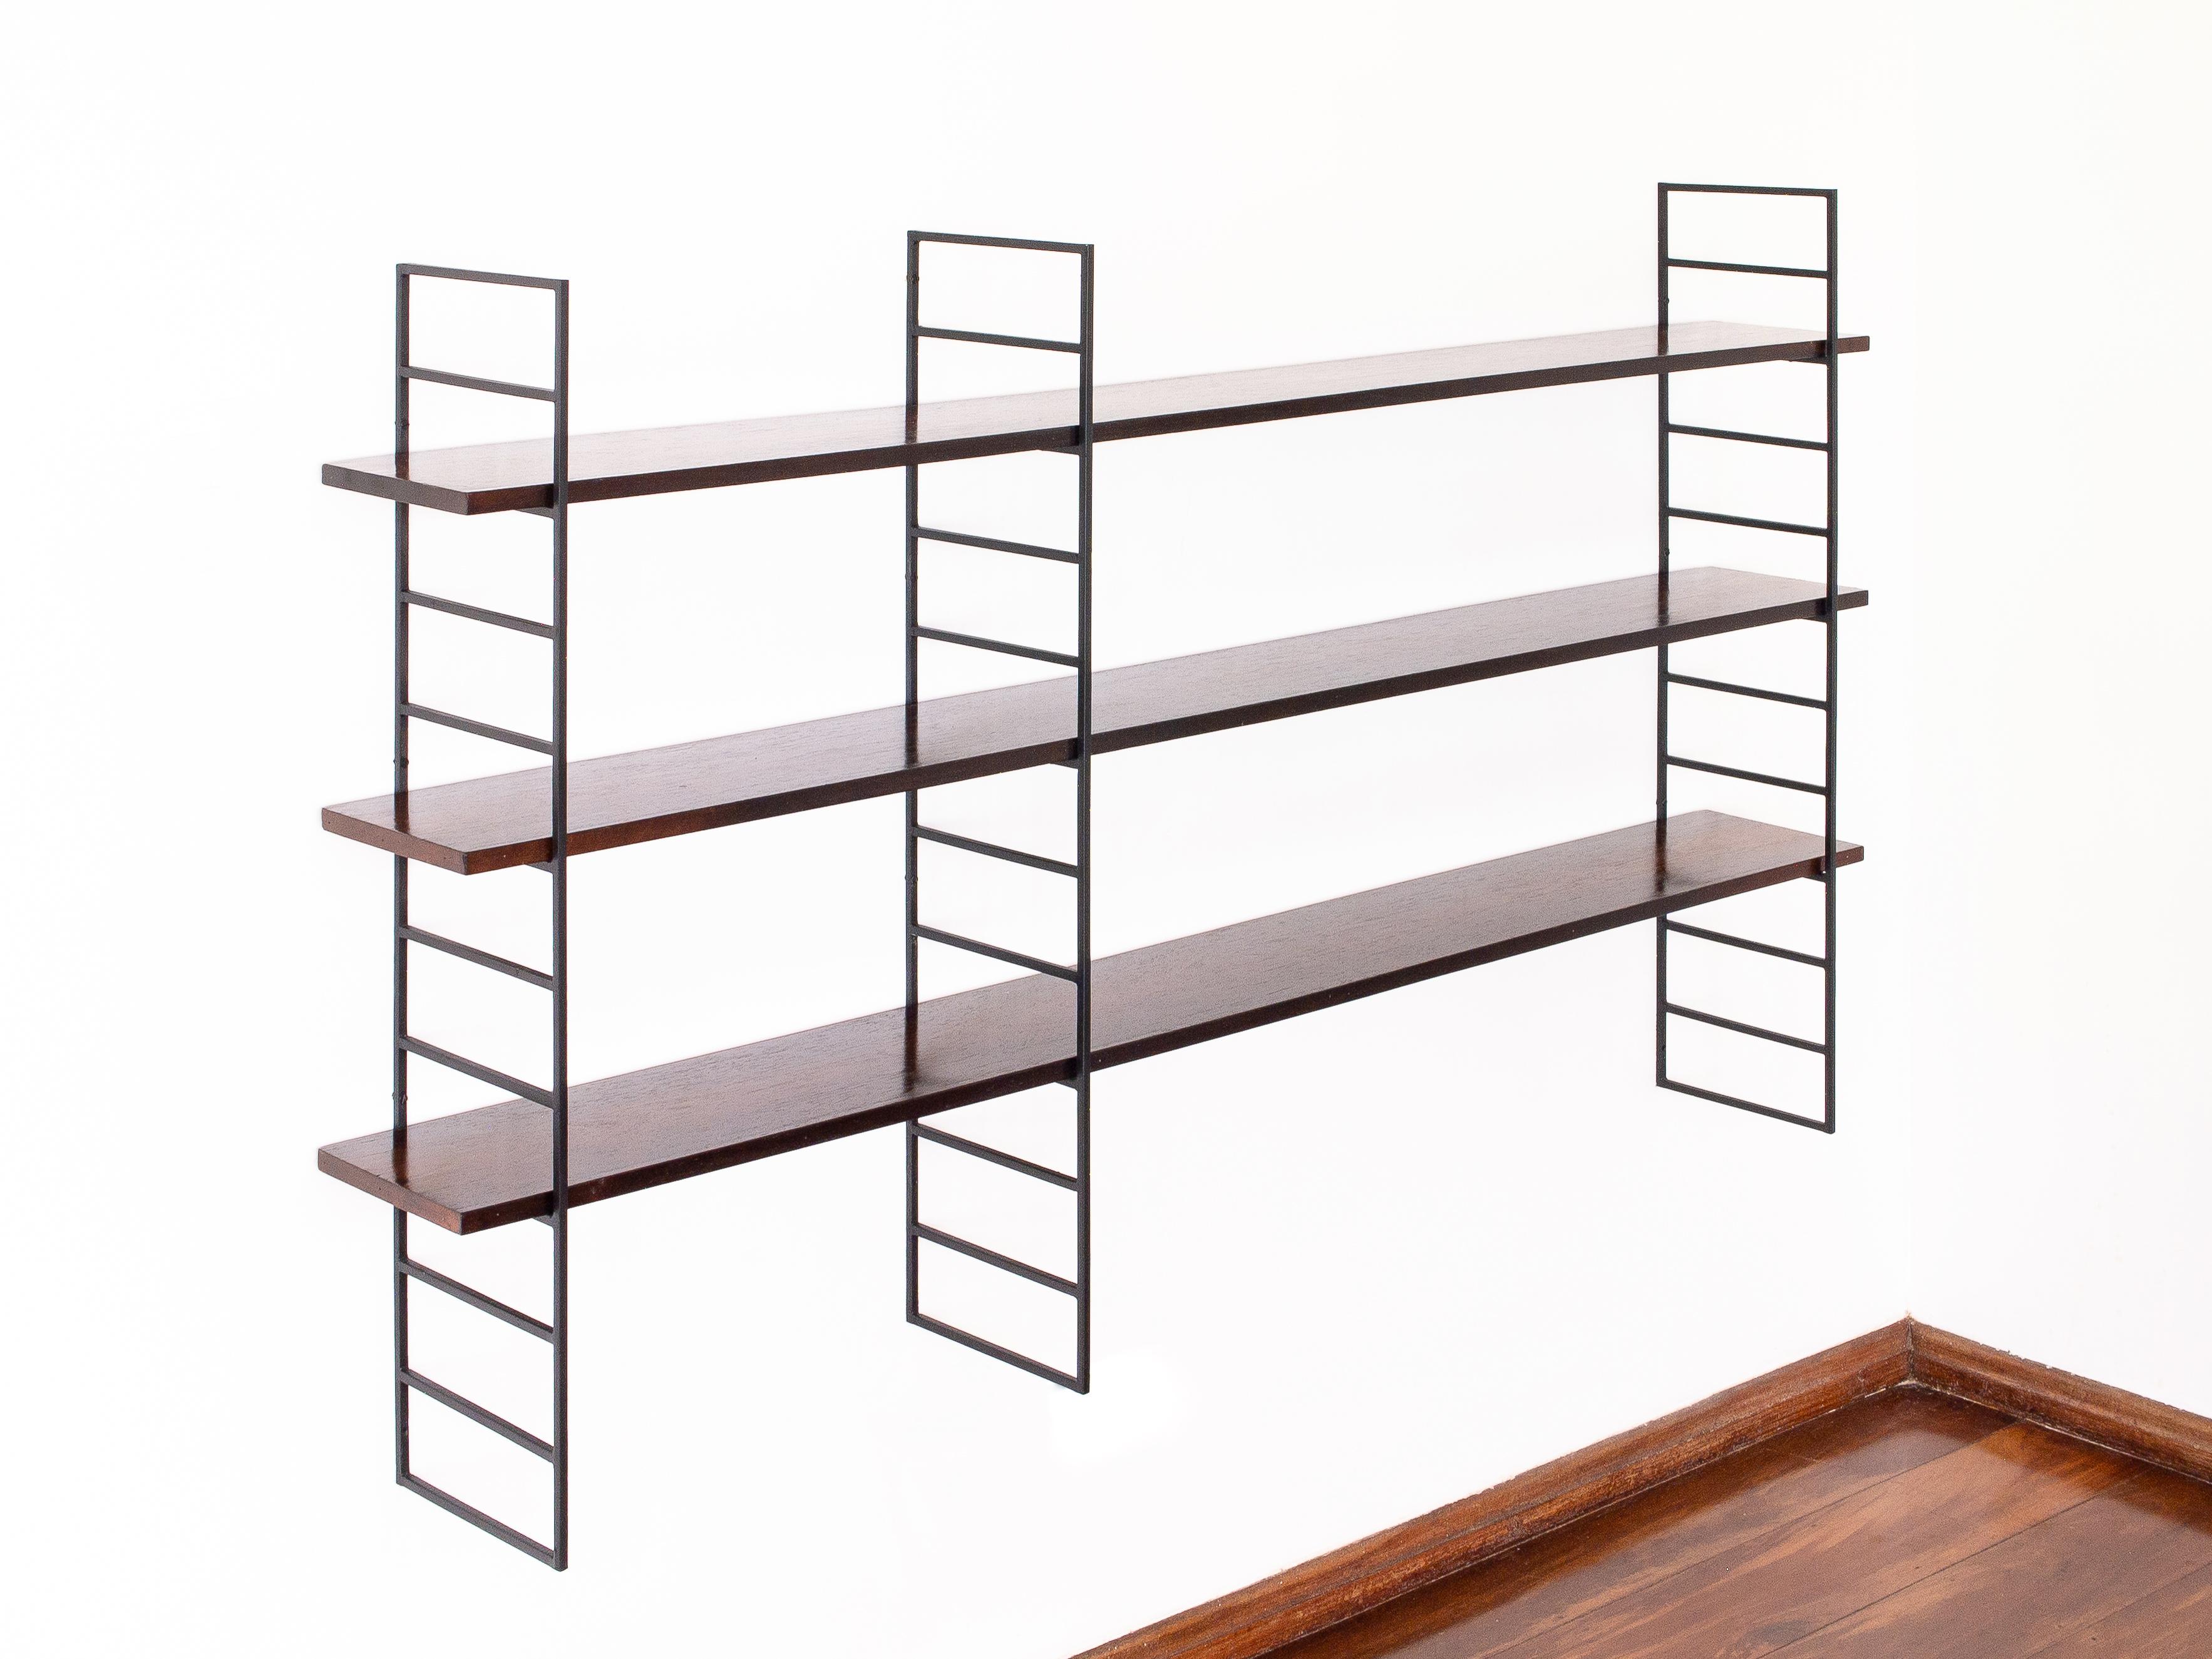 Veneer 1960s Floating Shelving Unit in Rosewood and Wrought Iron, Brazilian Modernism